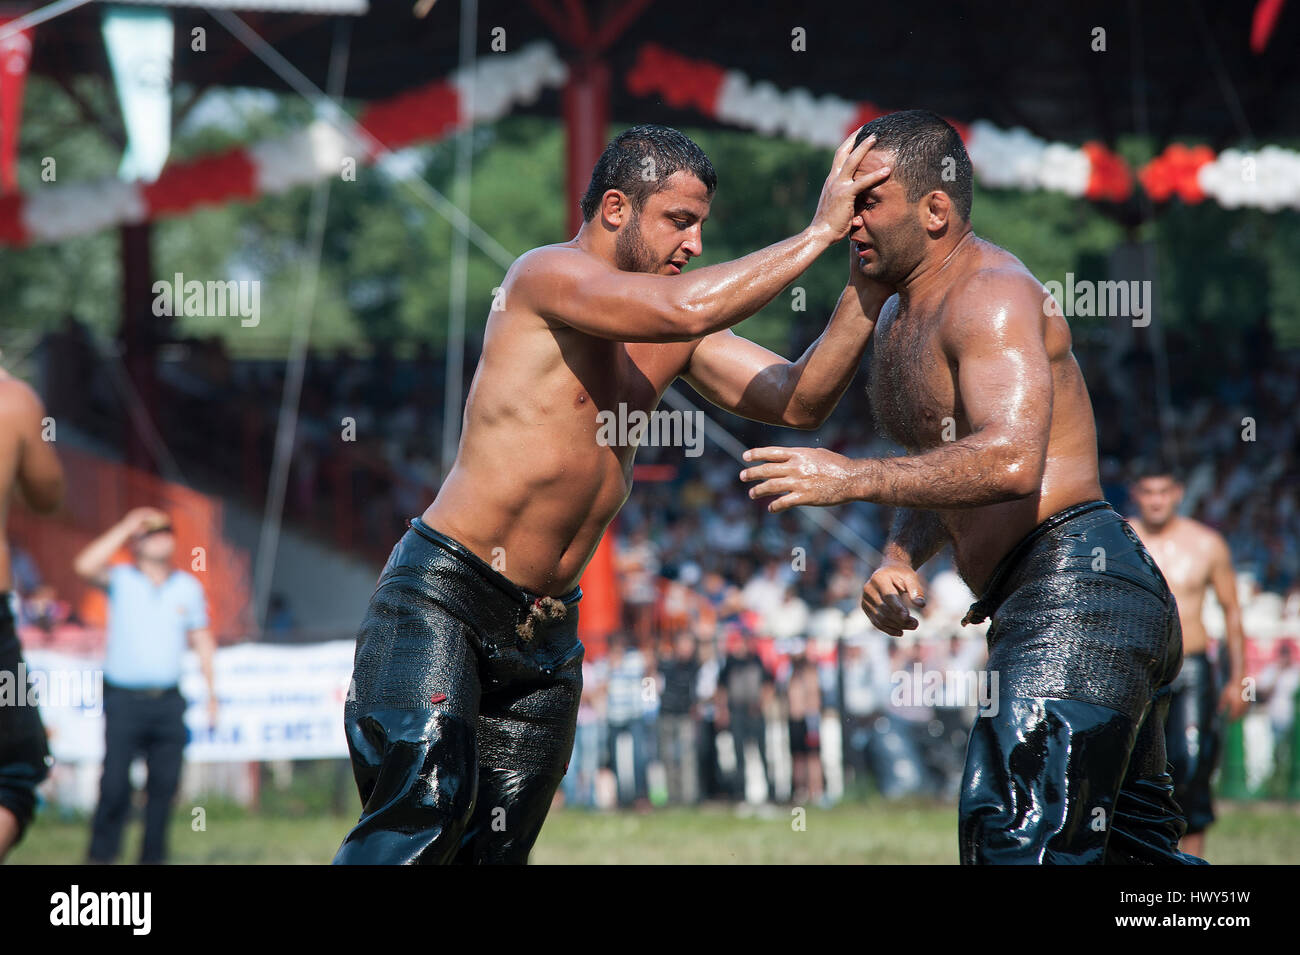 TURKEY, EDIRNE: Historical 'Kirkpinar Oil Wrestling' is the world's oldest sporting event after the Olympics, which has been continuing since the firs Stock Photo